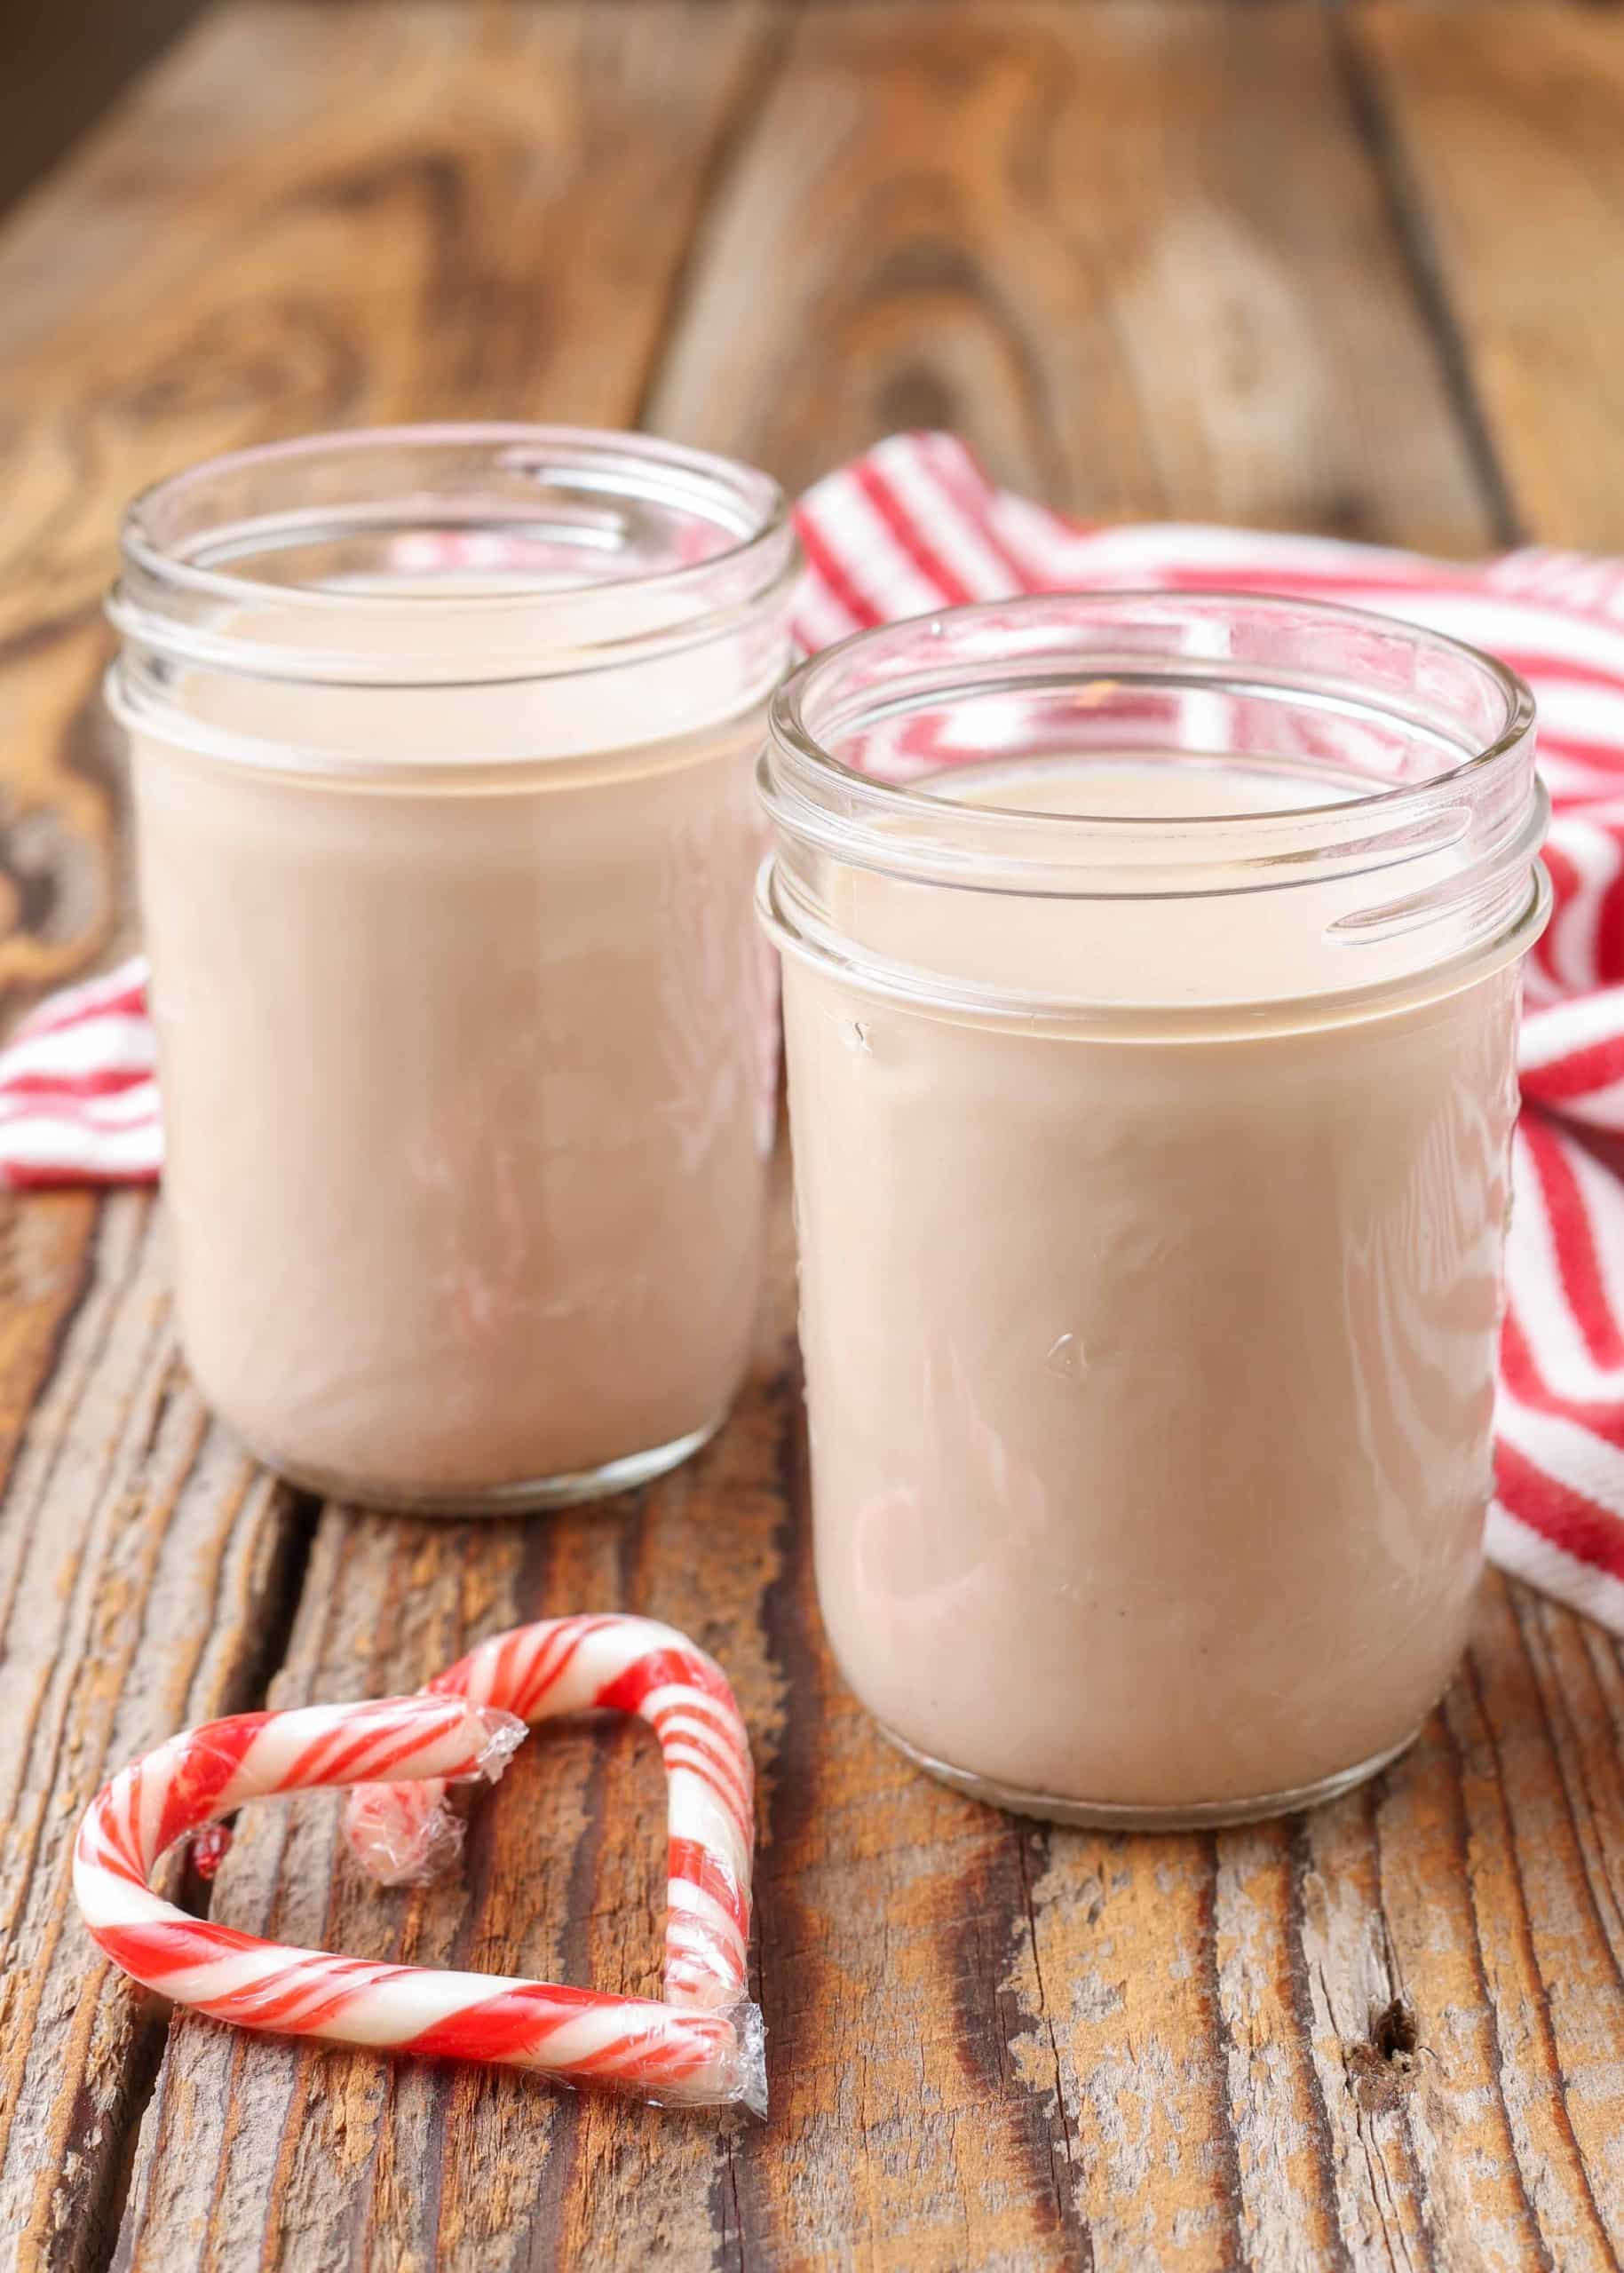 https://chocolatewithgrace.com/wp-content/uploads/2022/10/Peppermint-Mocha-Creamer-CWG-2-1-of-1-scaled.jpg